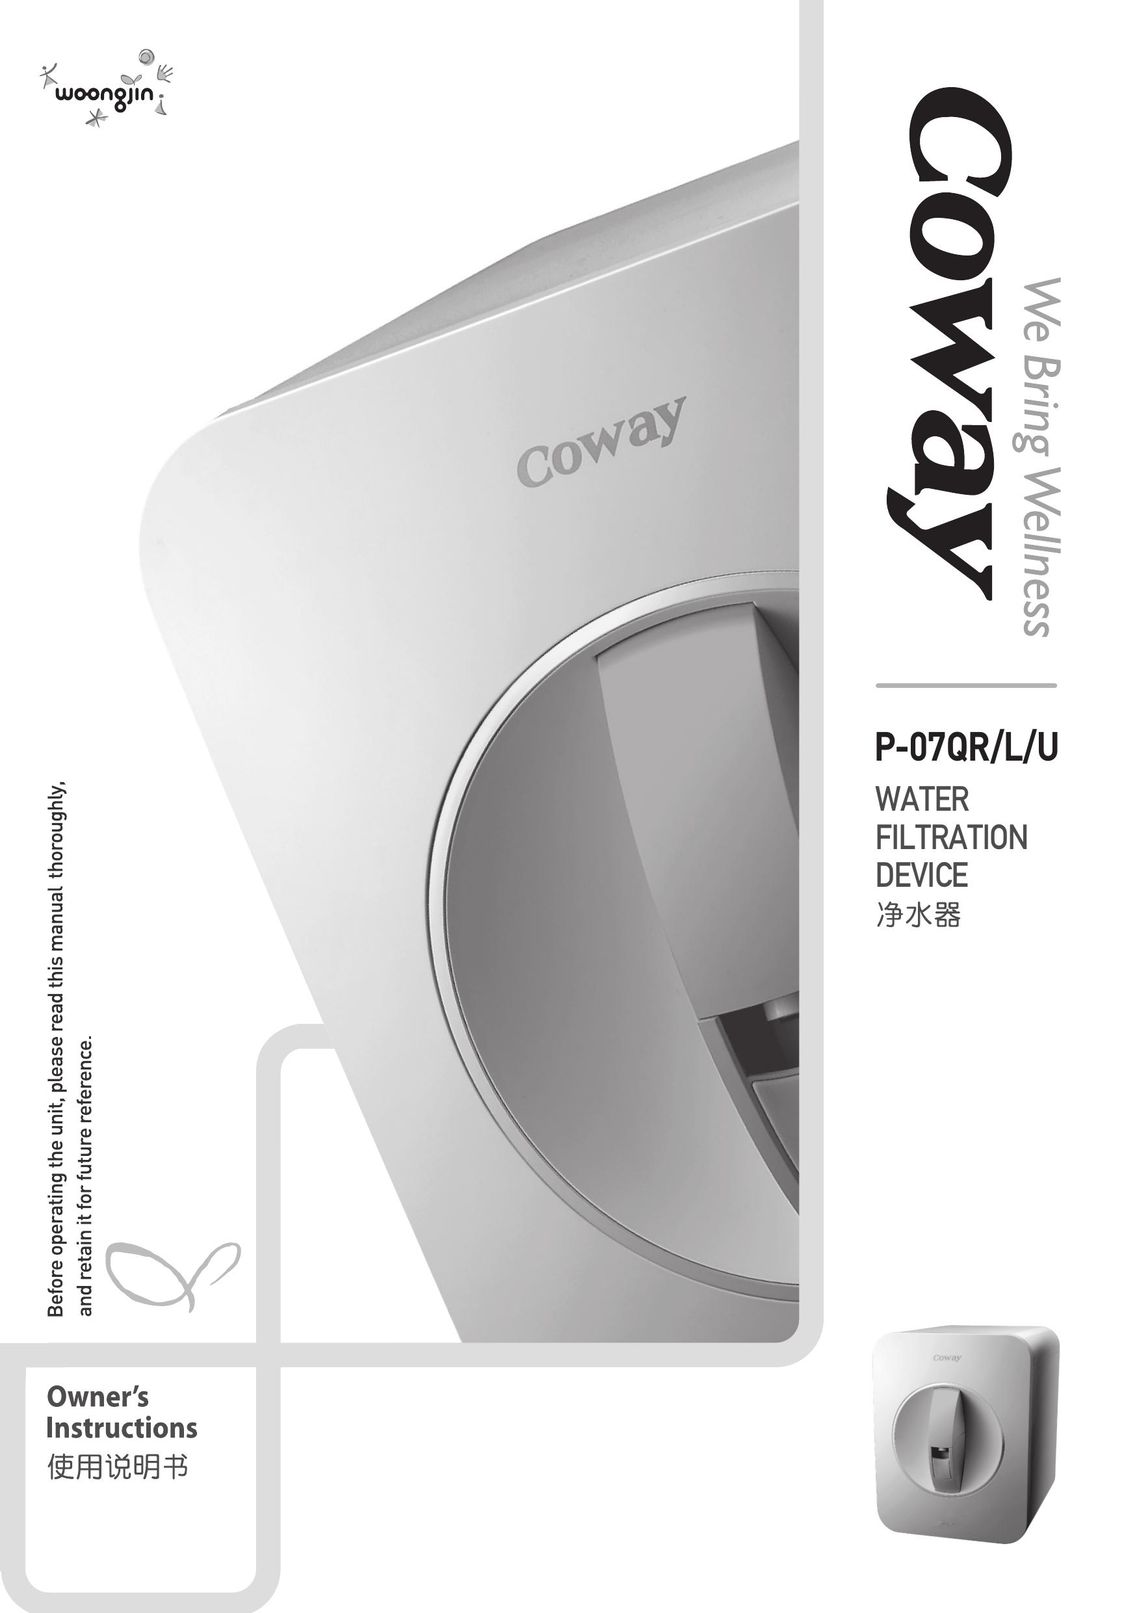 Coway P-07QR Water System User Manual